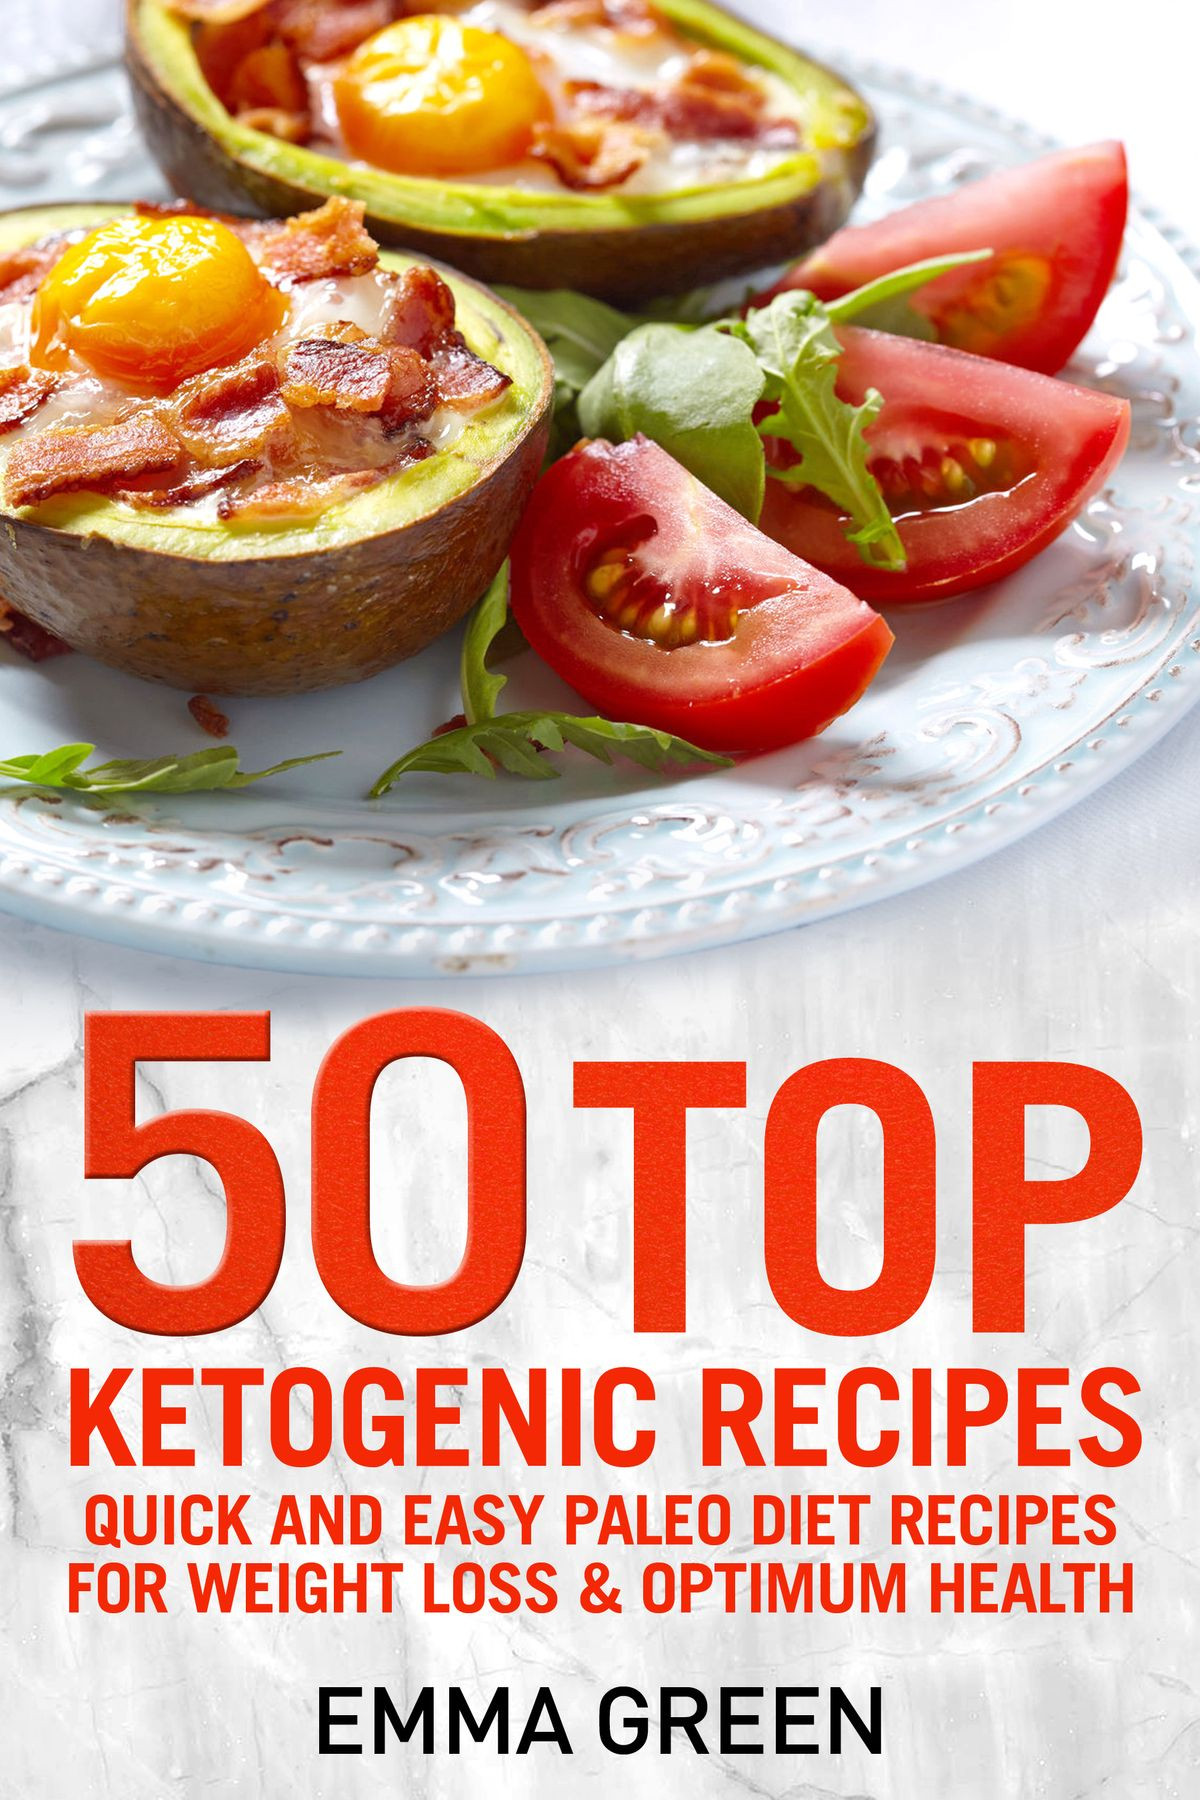 Easy Keto Diet For Weight Loss
 50 Top Ketogenic Recipes Quick and Easy Keto Diet Recipes